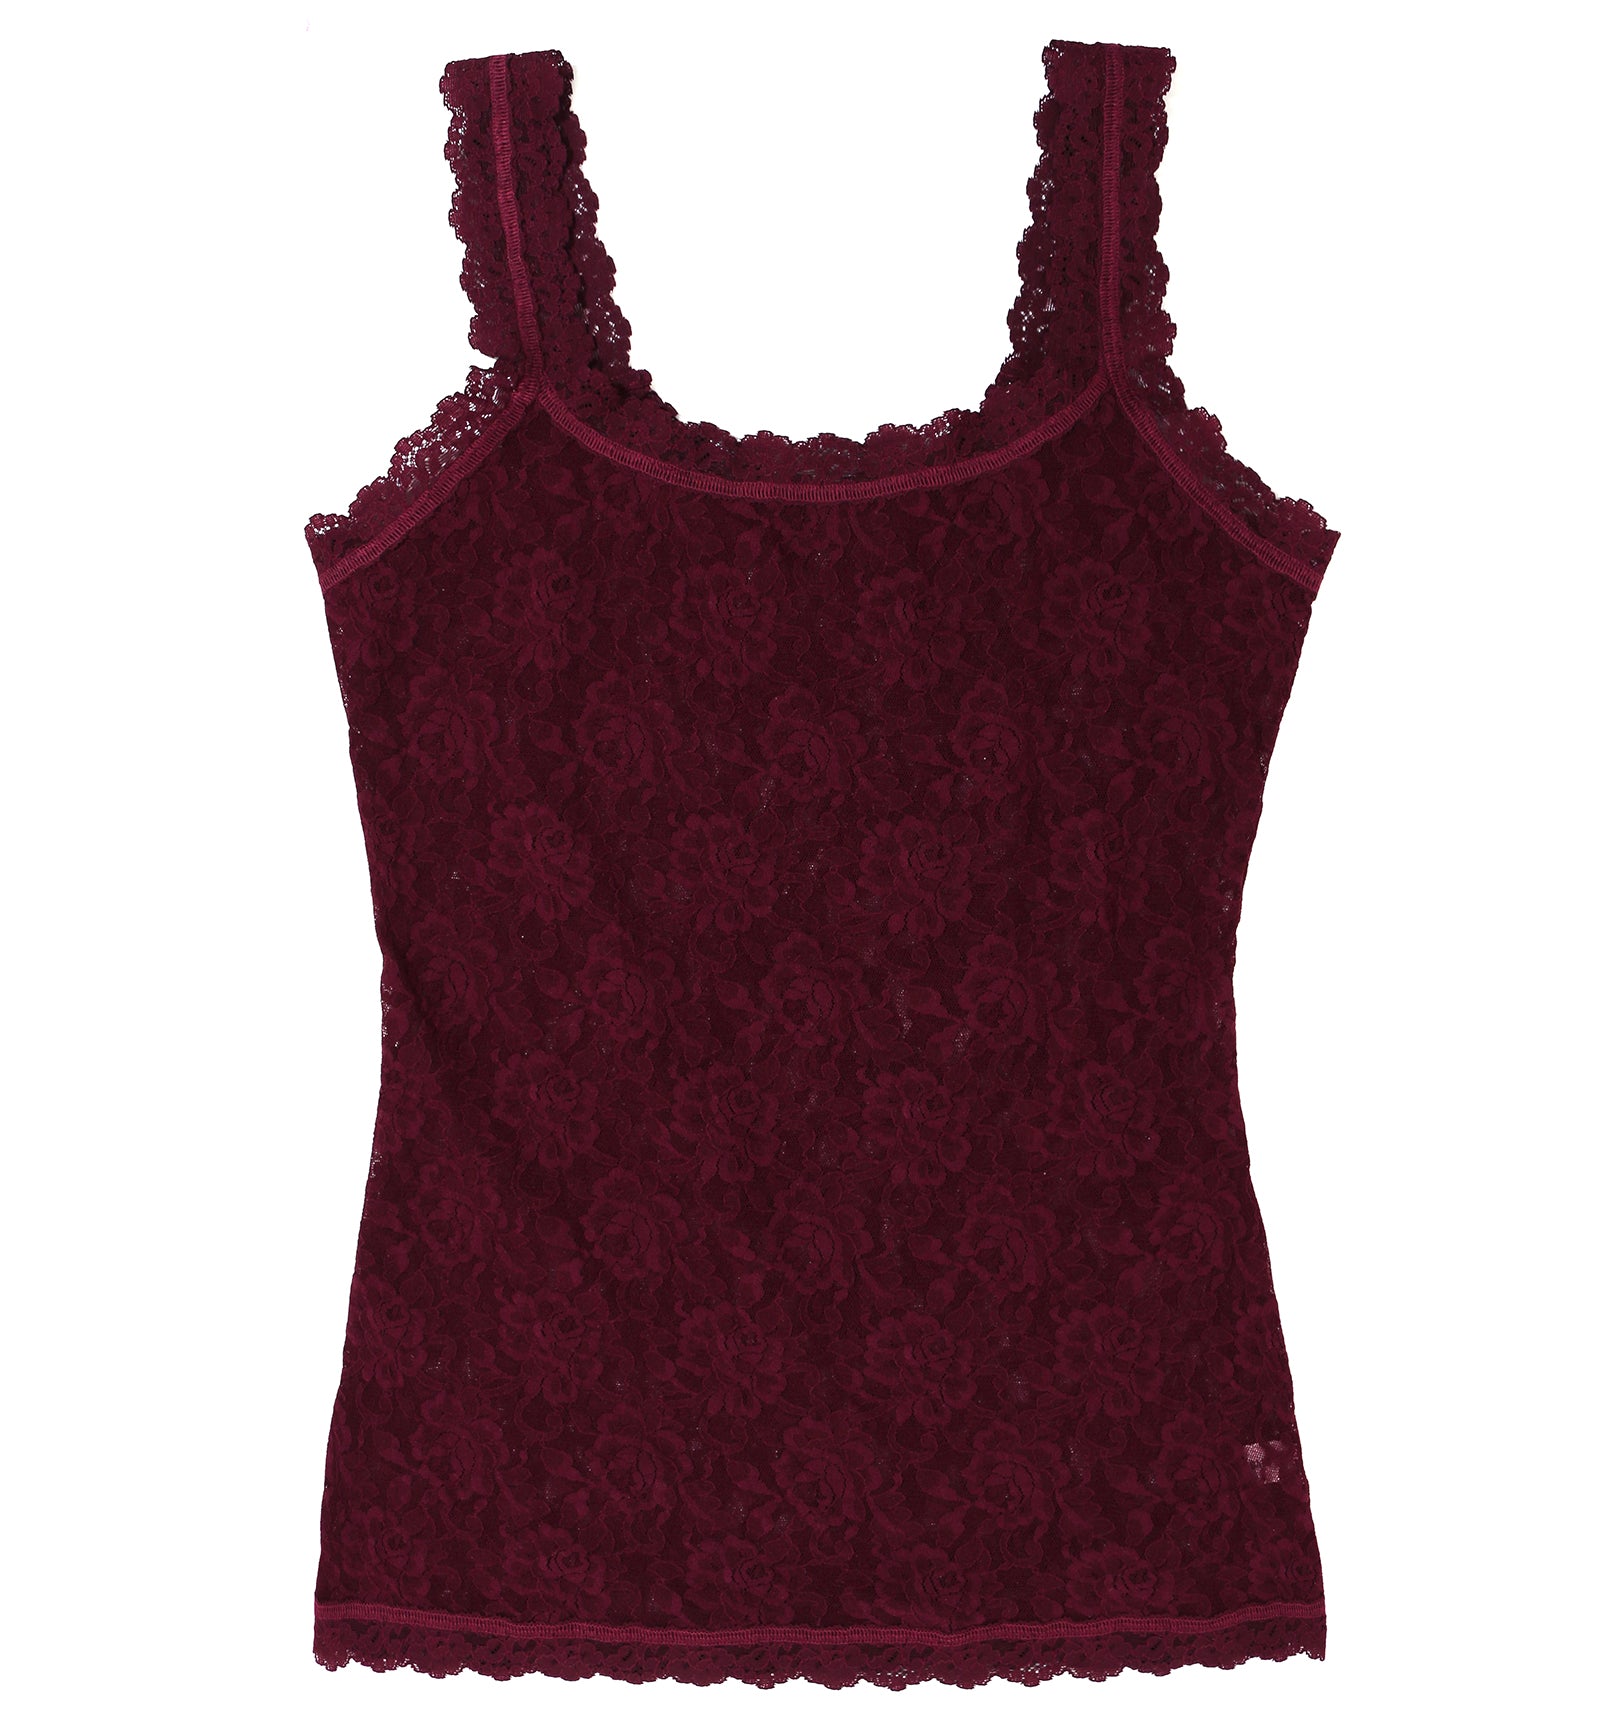 Hanky Panky Signature Lace Unlined Camisole (1390LP),XS,Dried Cherry - Dried Cherry,XS